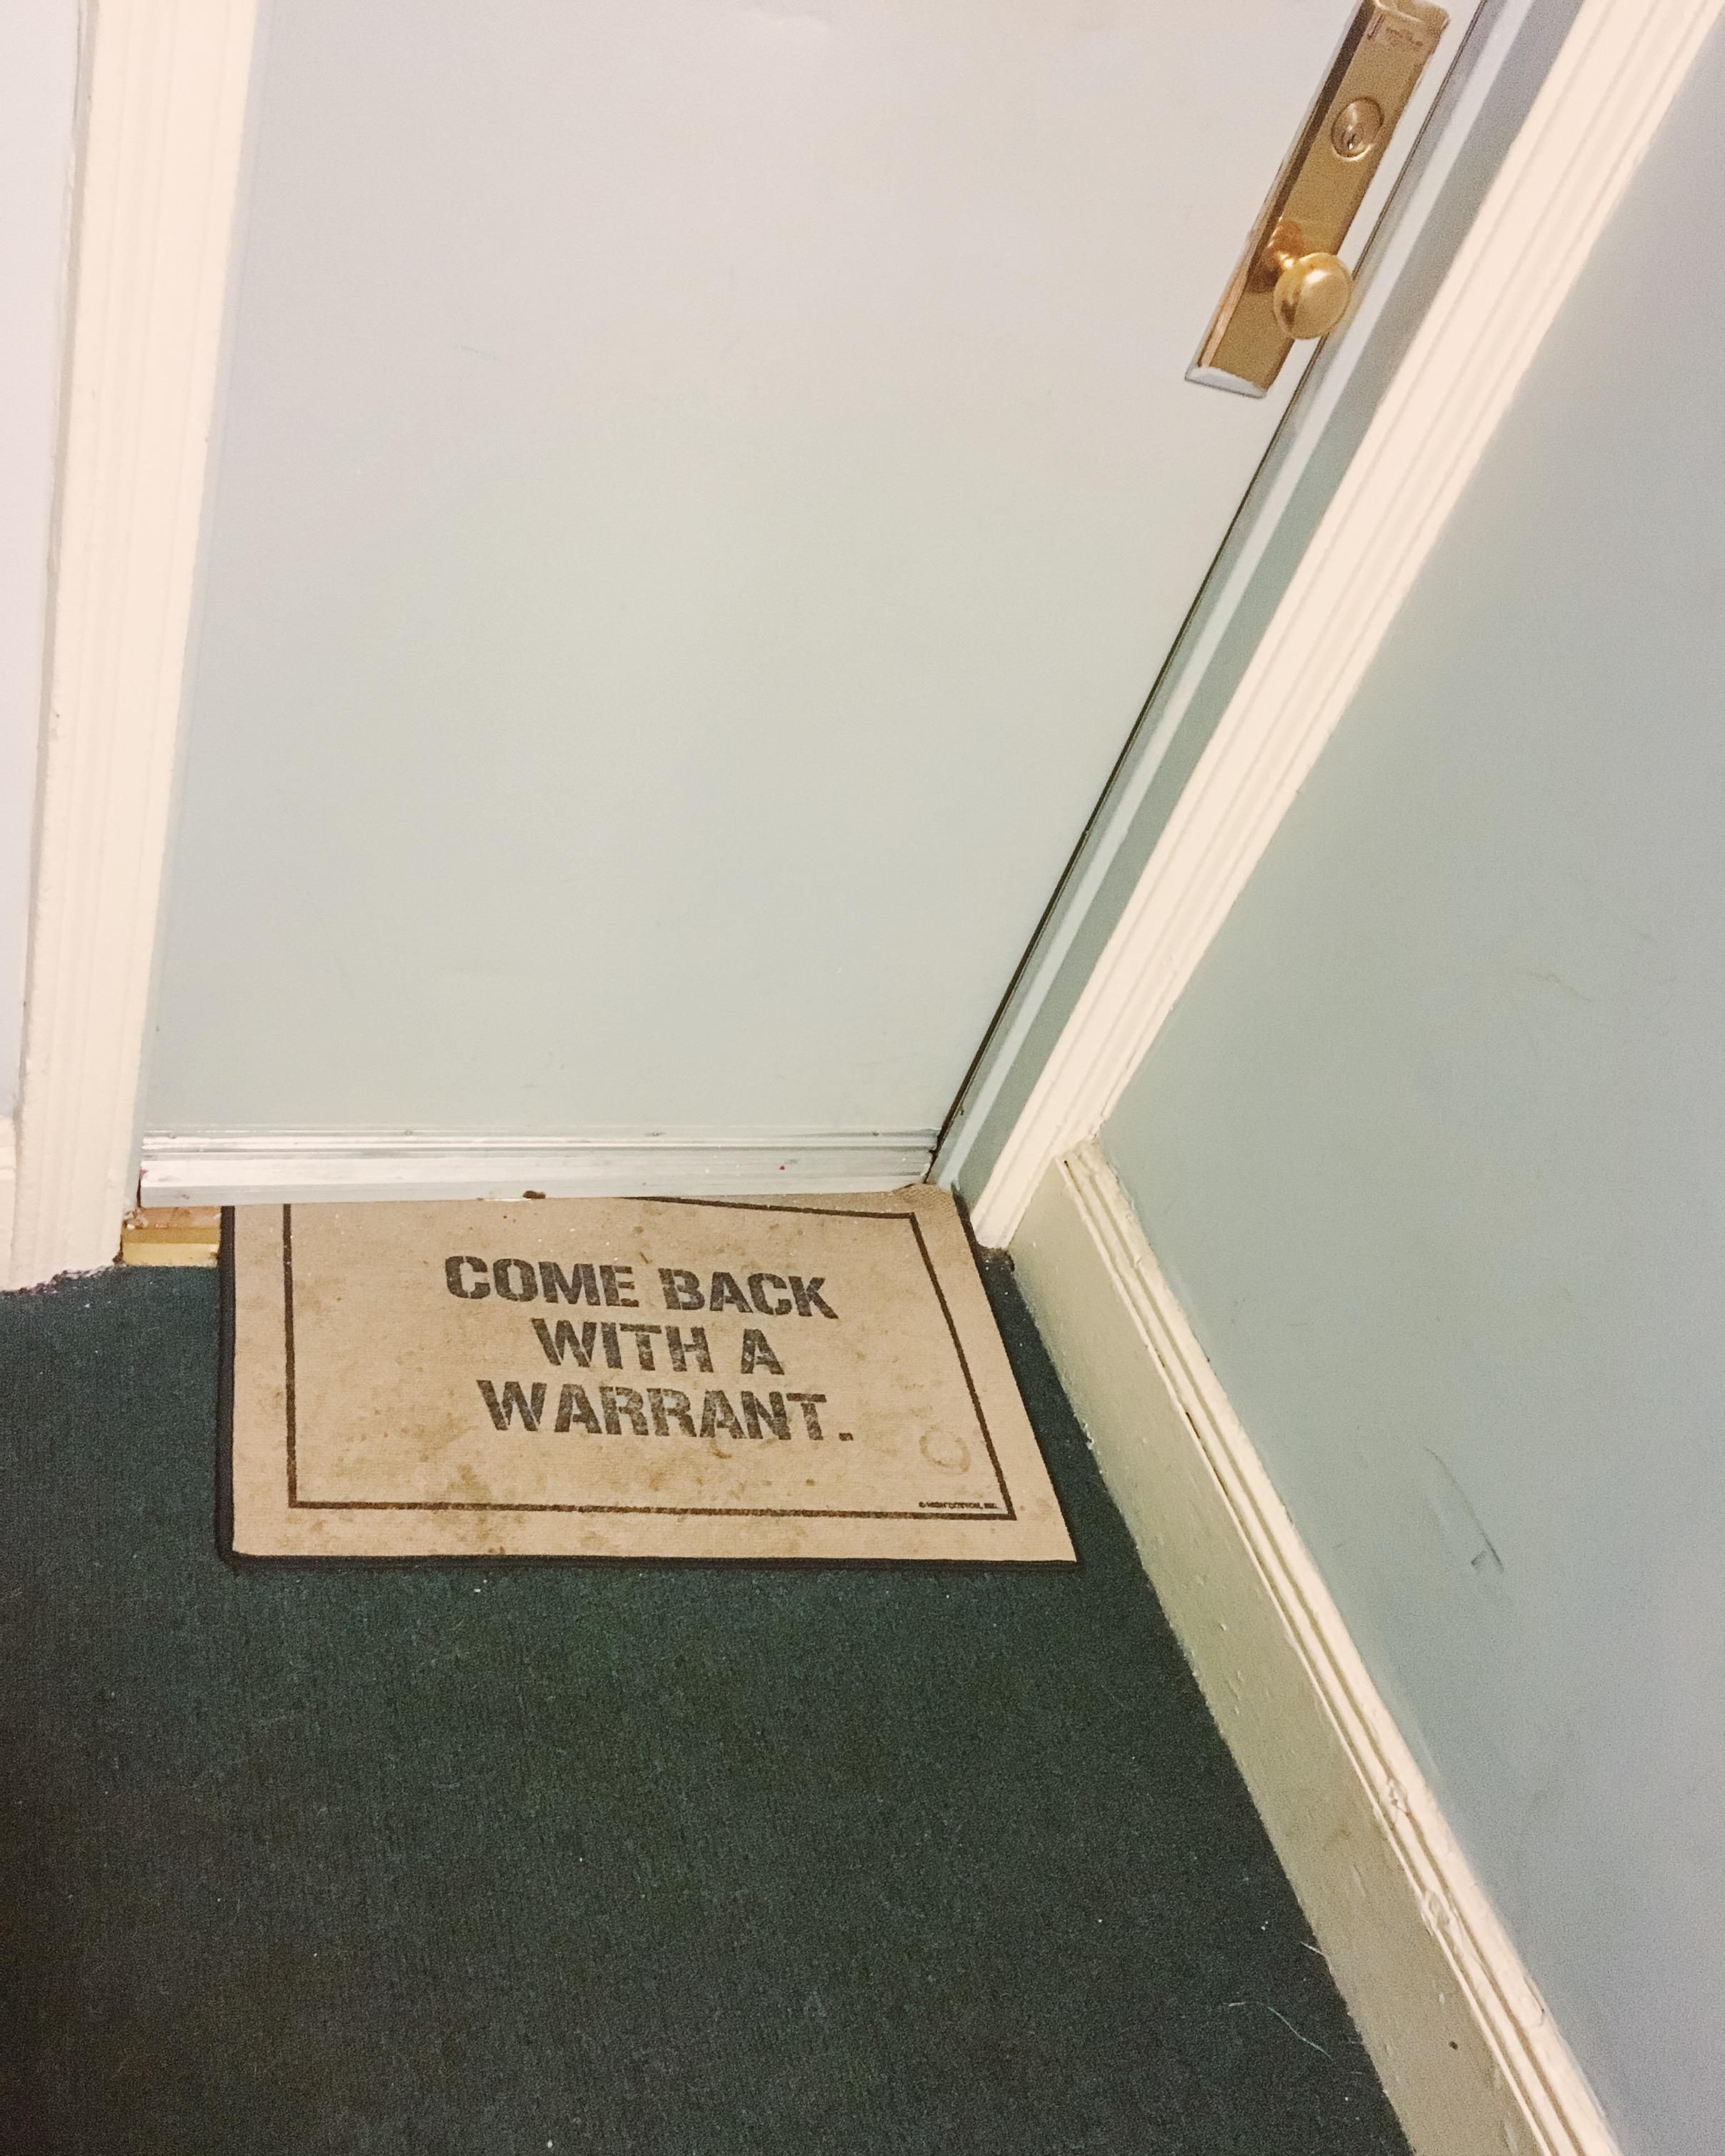 I live in NYC, and this is the doormat of the 92 year old woman who lives in my building.